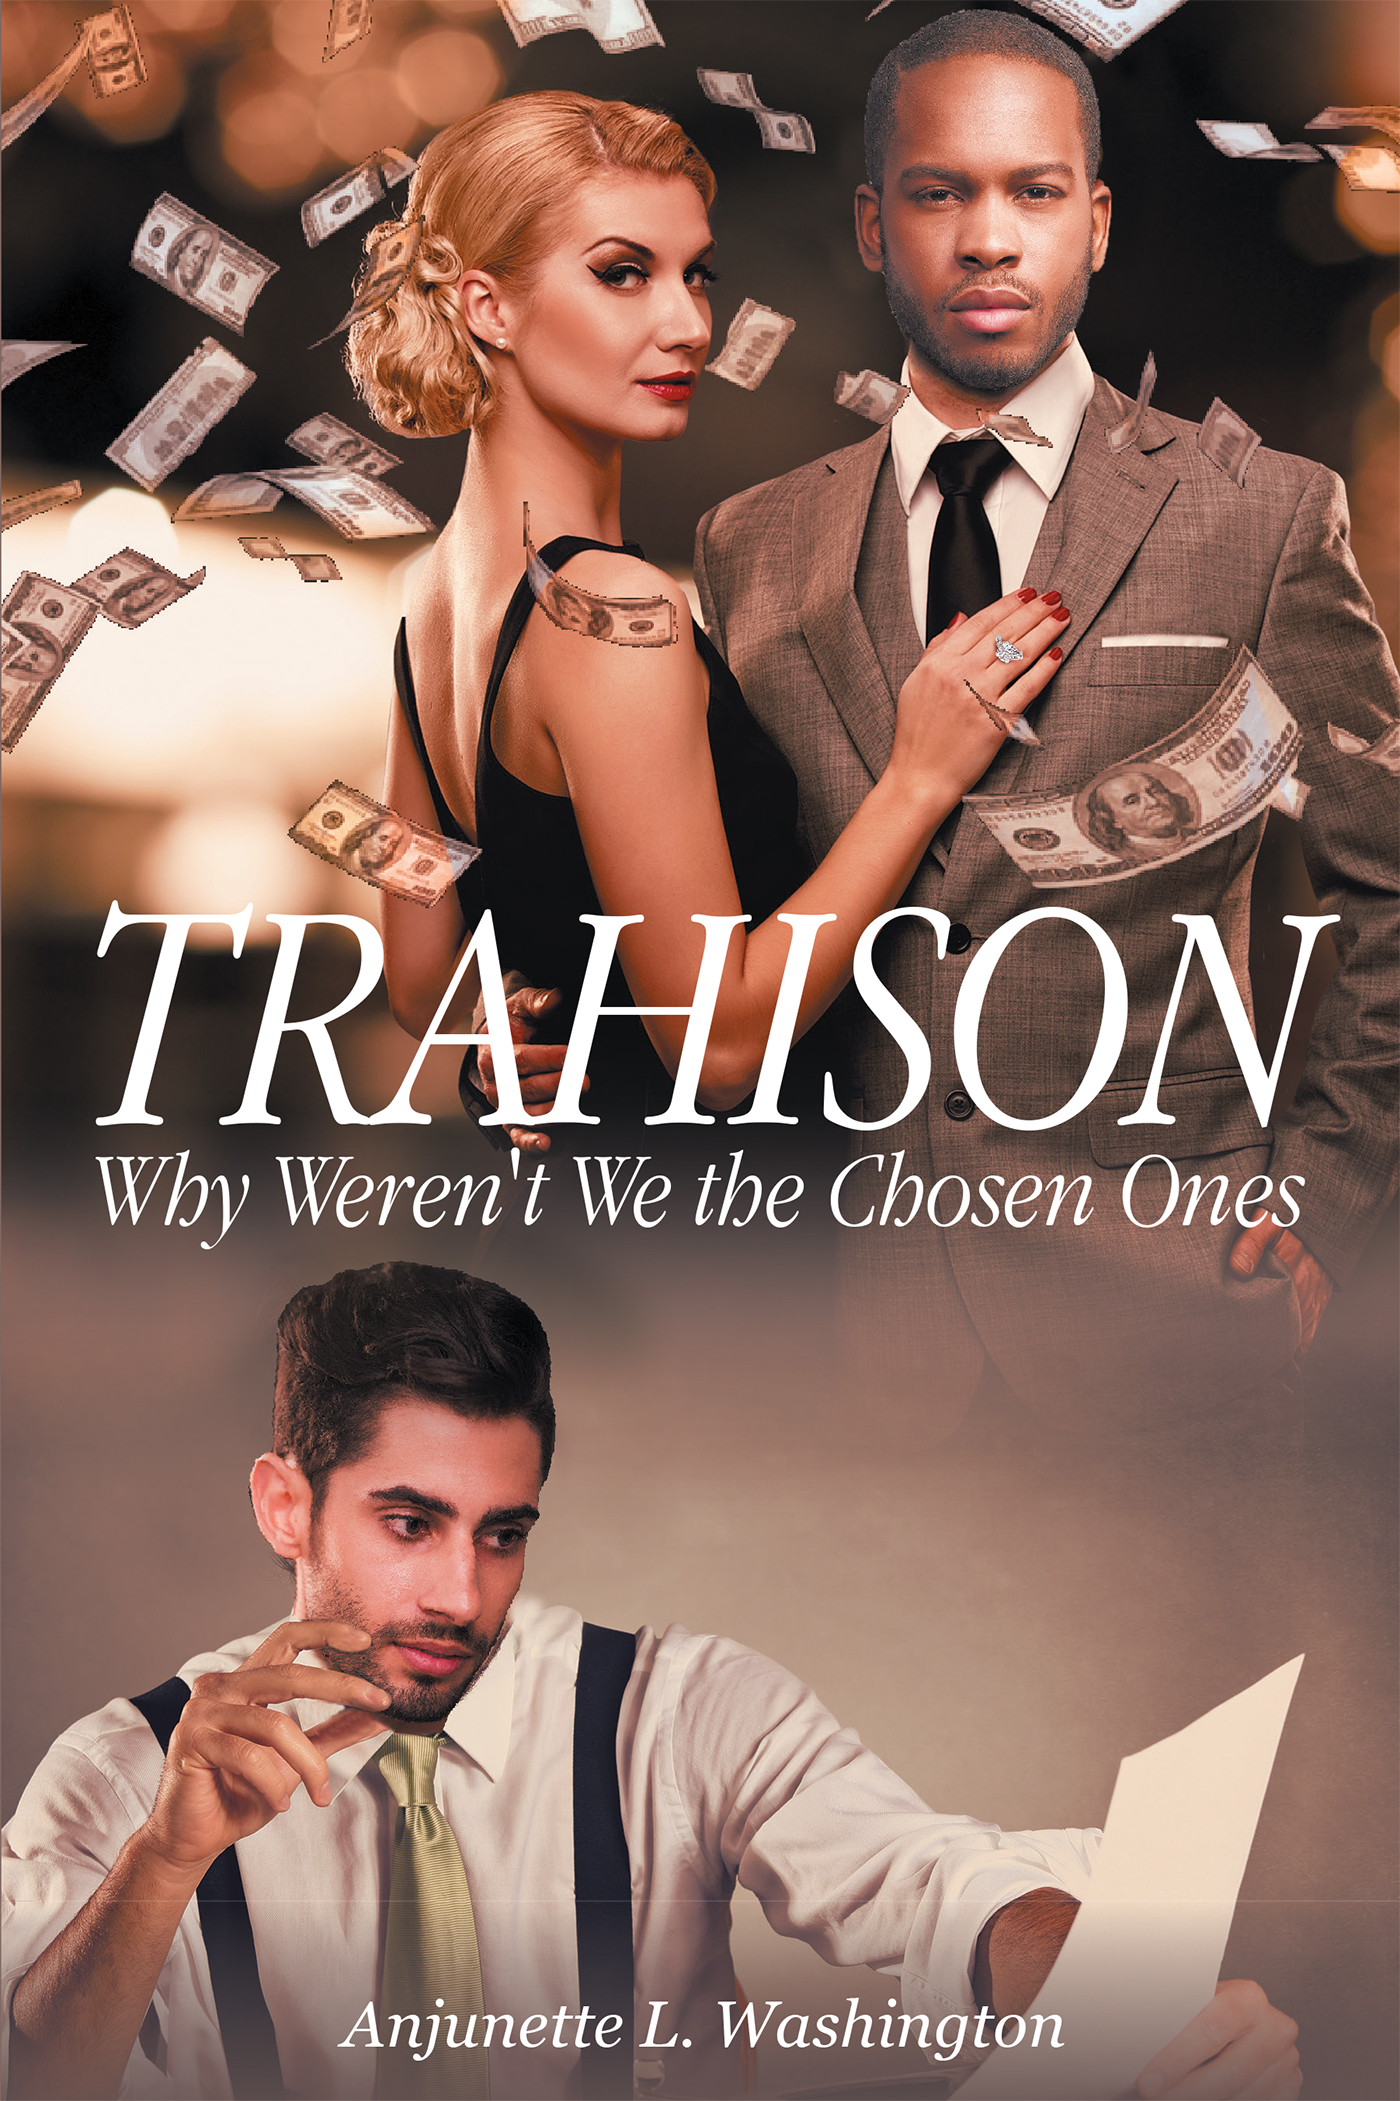 Anjunette L Washingtons New Book “trahison Why Werent We The Chosen Ones” Is A Breathtaking